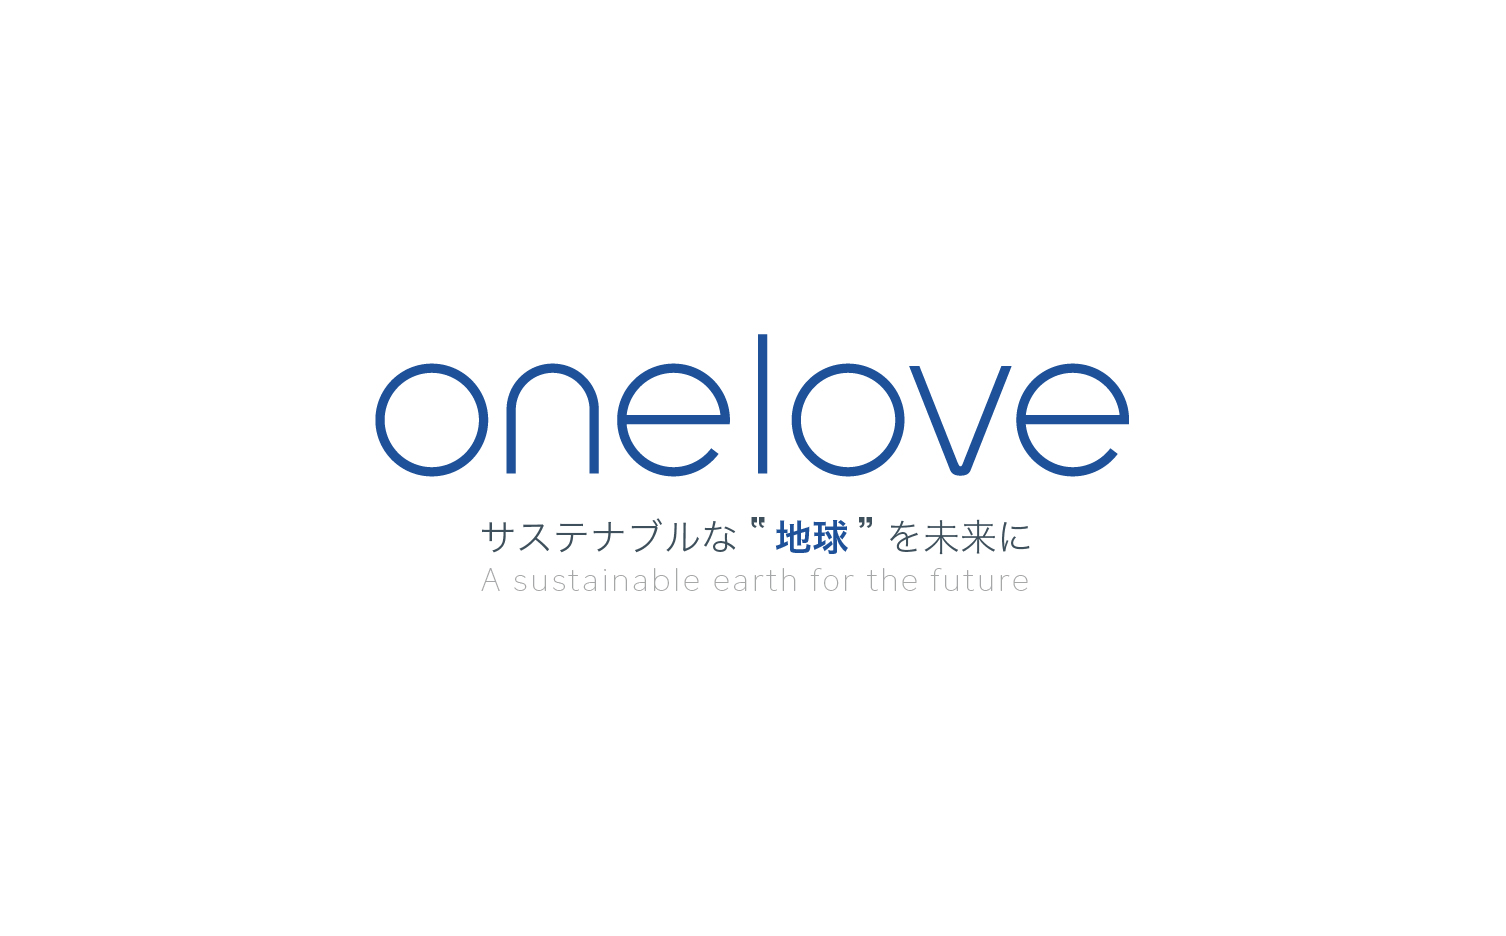 onelove | サステナブルな地球を未来に
-a sustainable earth for the future-